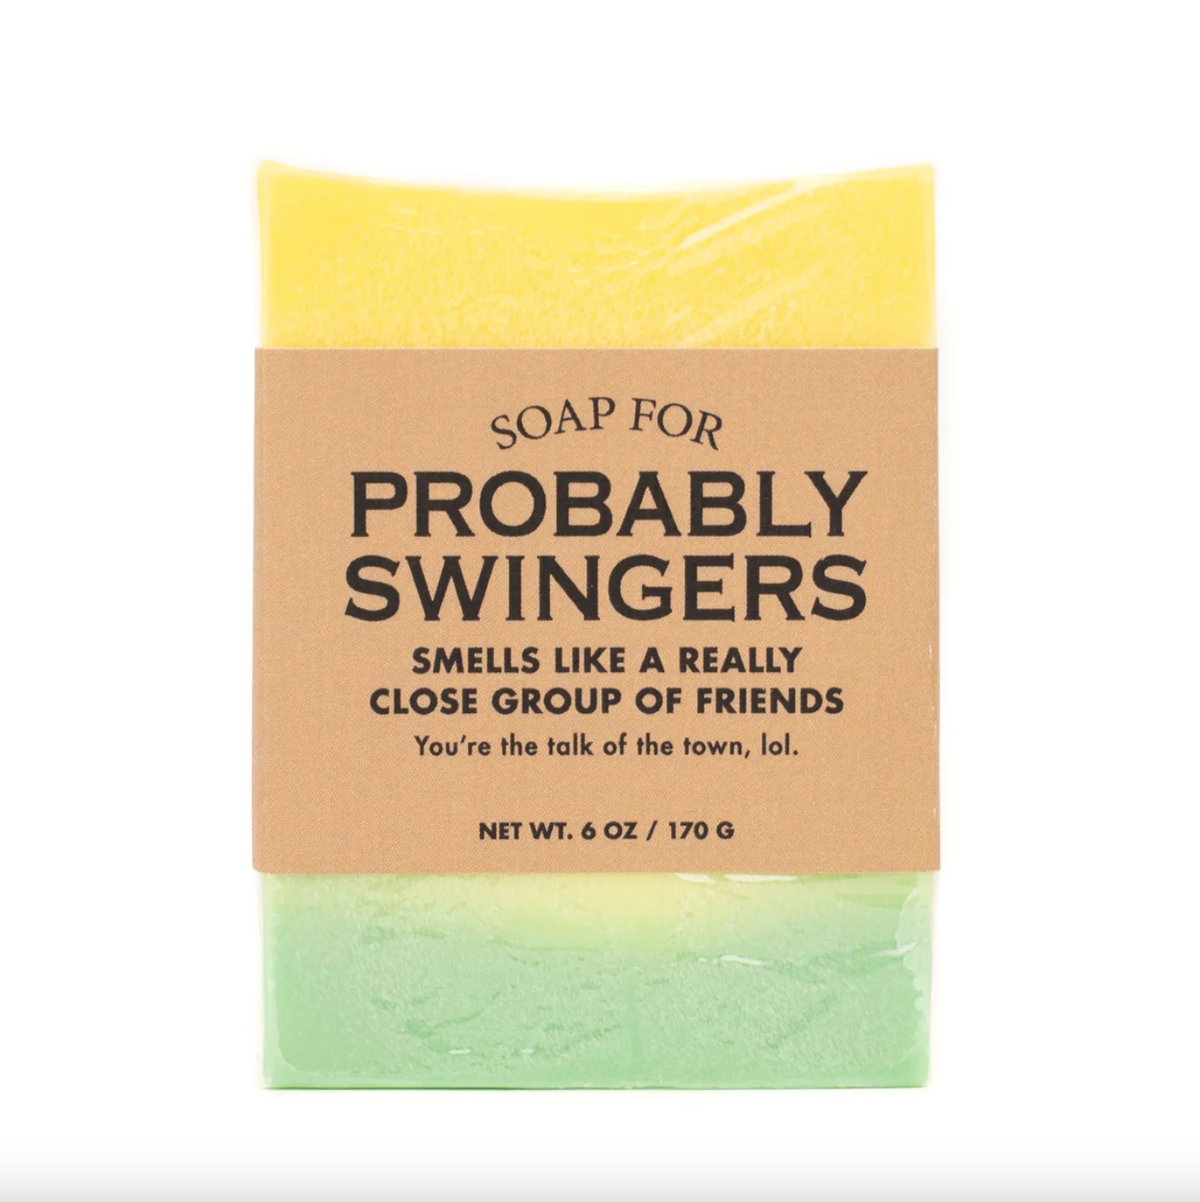 A Soap for Probably Swingers - Heart of the Home LV